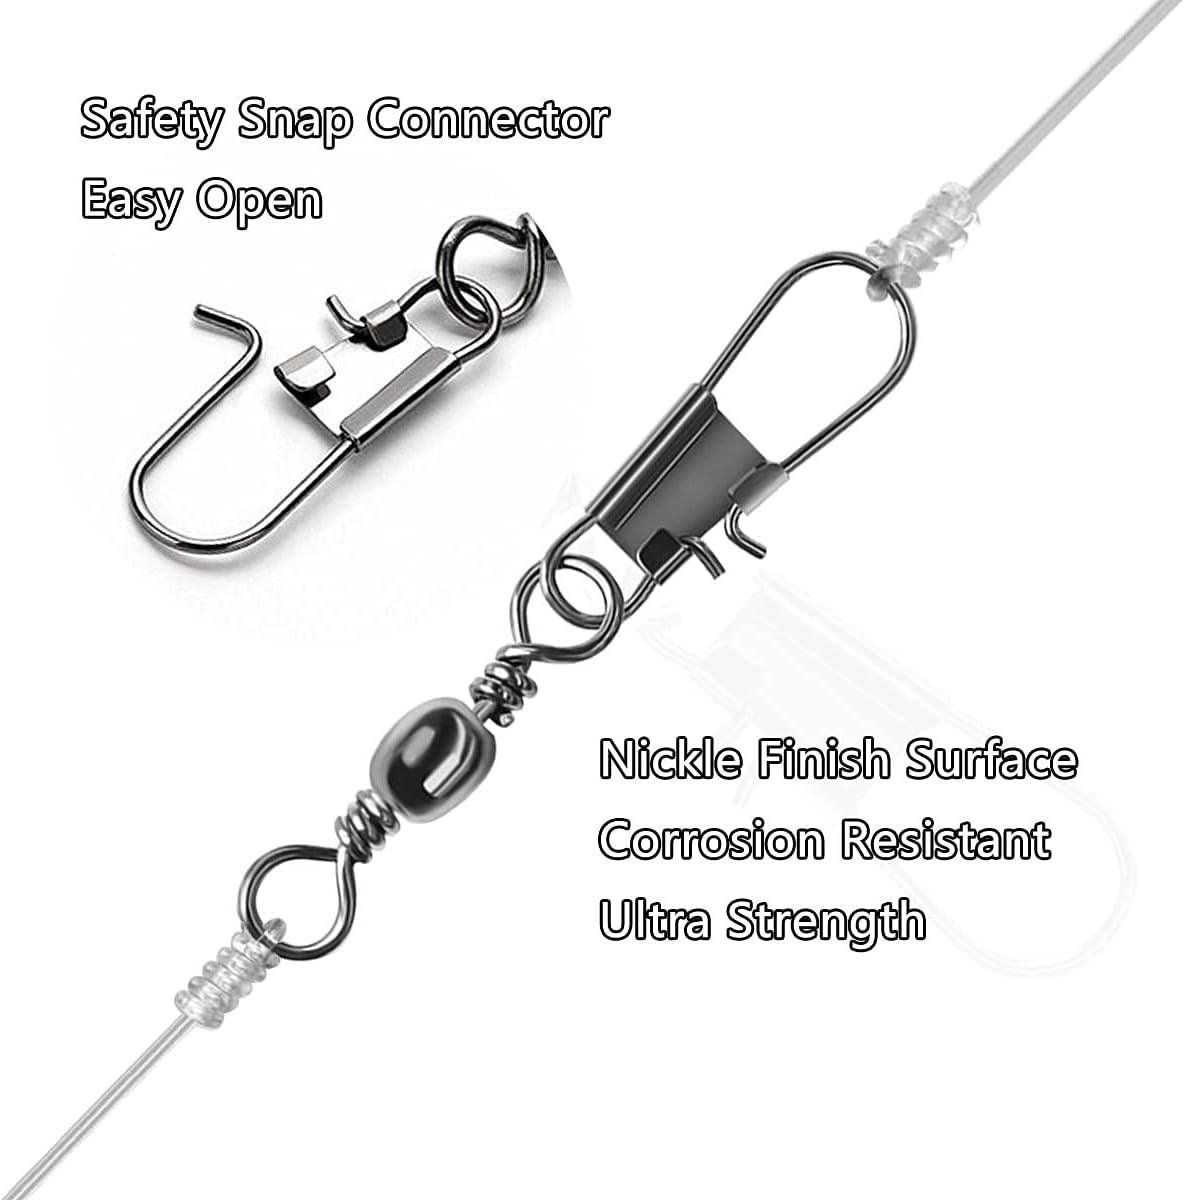  ENERHIKE 150pcs Fishing Snap Swivels Barrel Swivel with  Coastlock Snap Stainless Swivel Corrosion Resistant Fishing Tackle  Accessories Lure Line Connector for Saltwater Freshwater Fishing : Sports &  Outdoors